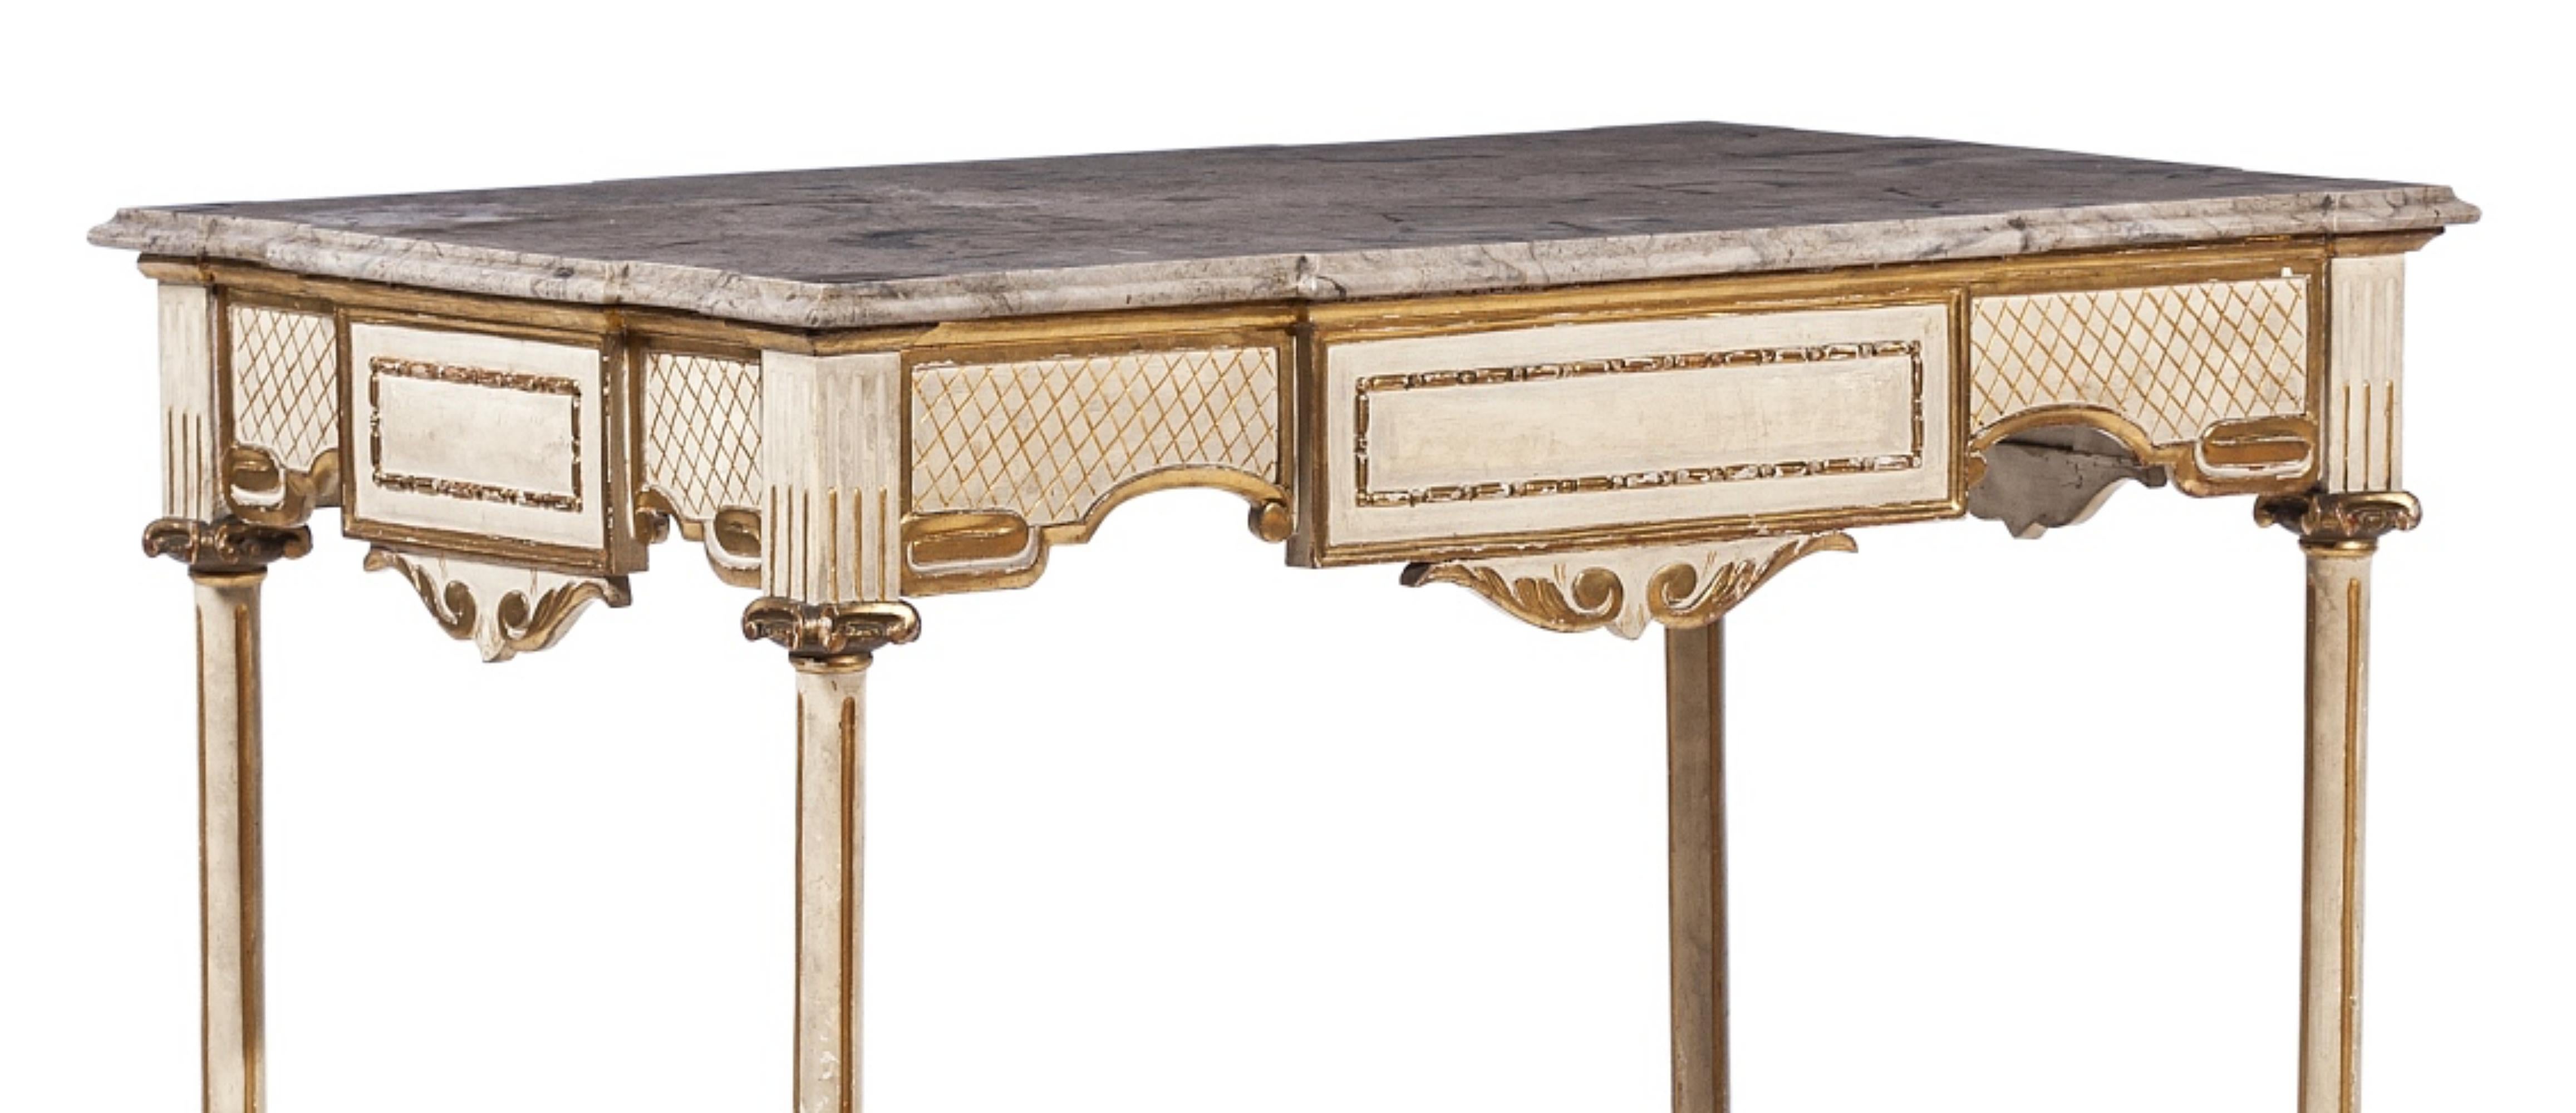 Hand-Crafted Center Table French, Early 19th Century Louis XV Style For Sale